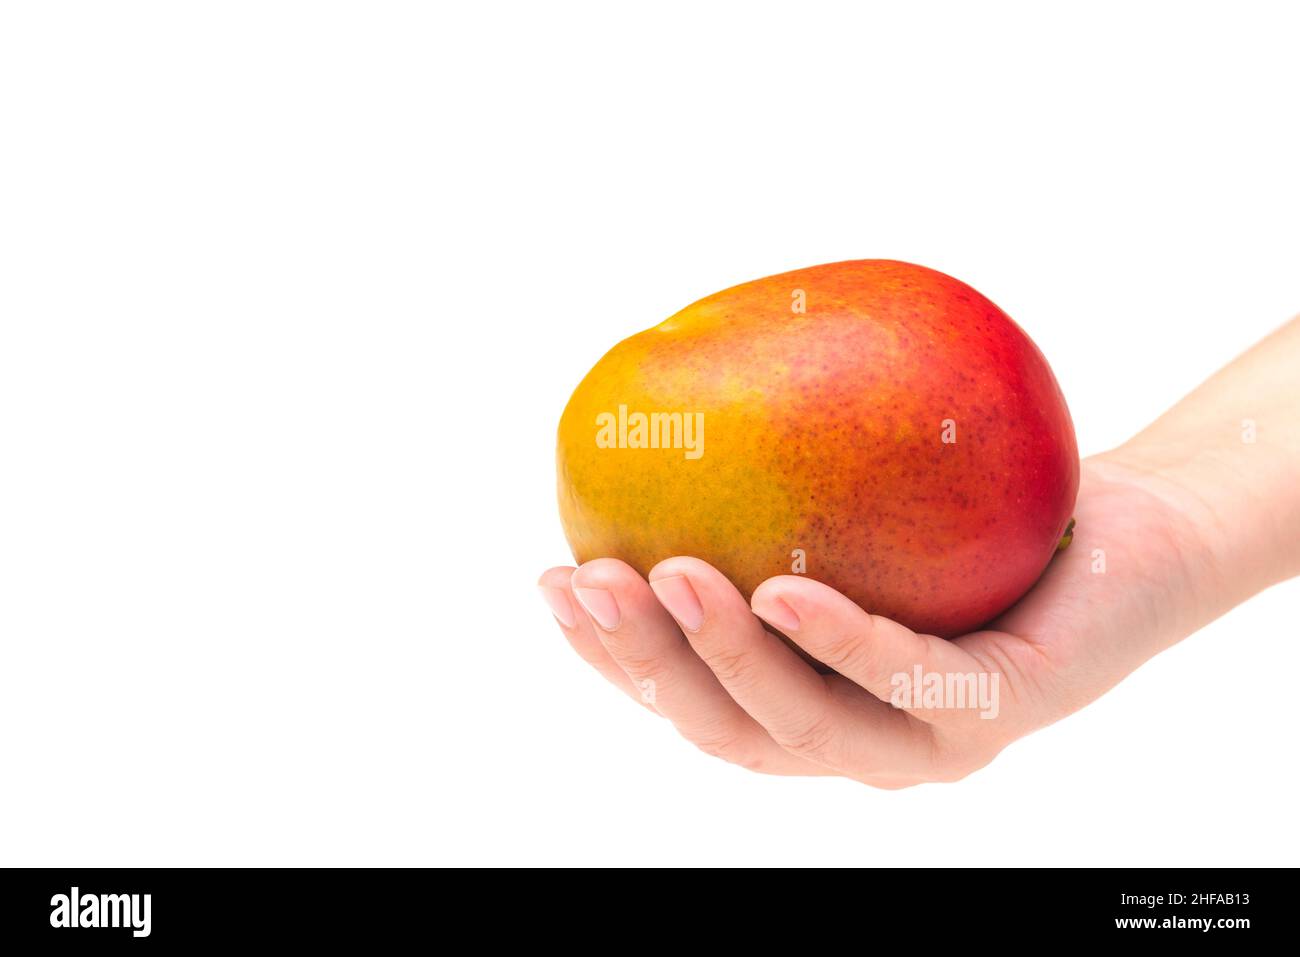 Mango fruit in hand on a white background Stock Photo